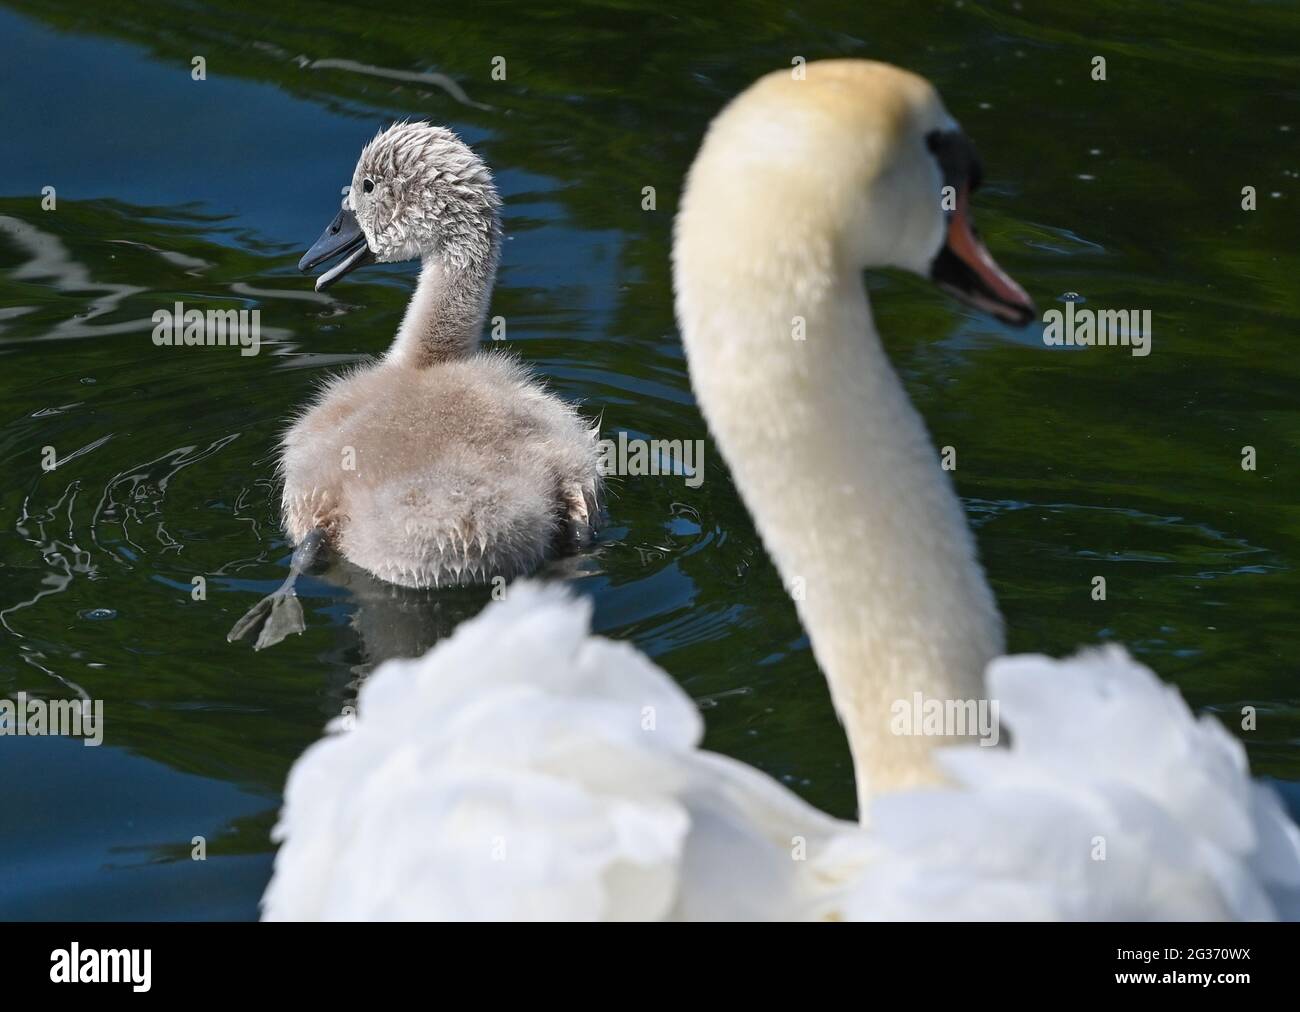 Bad Saarow, Germany. 14th June, 2021. A young mute swan swims next to a parent on Lake Scharmützel in the Oder-Spree district. The body of water in the Storkower Land, also called the Märkisches Meer by Fontane, is the largest lake in Brandenburg with about 1,500 hectares of water surface. Credit: Patrick Pleul/dpa-Zentralbild/ZB/dpa/Alamy Live News Stock Photo